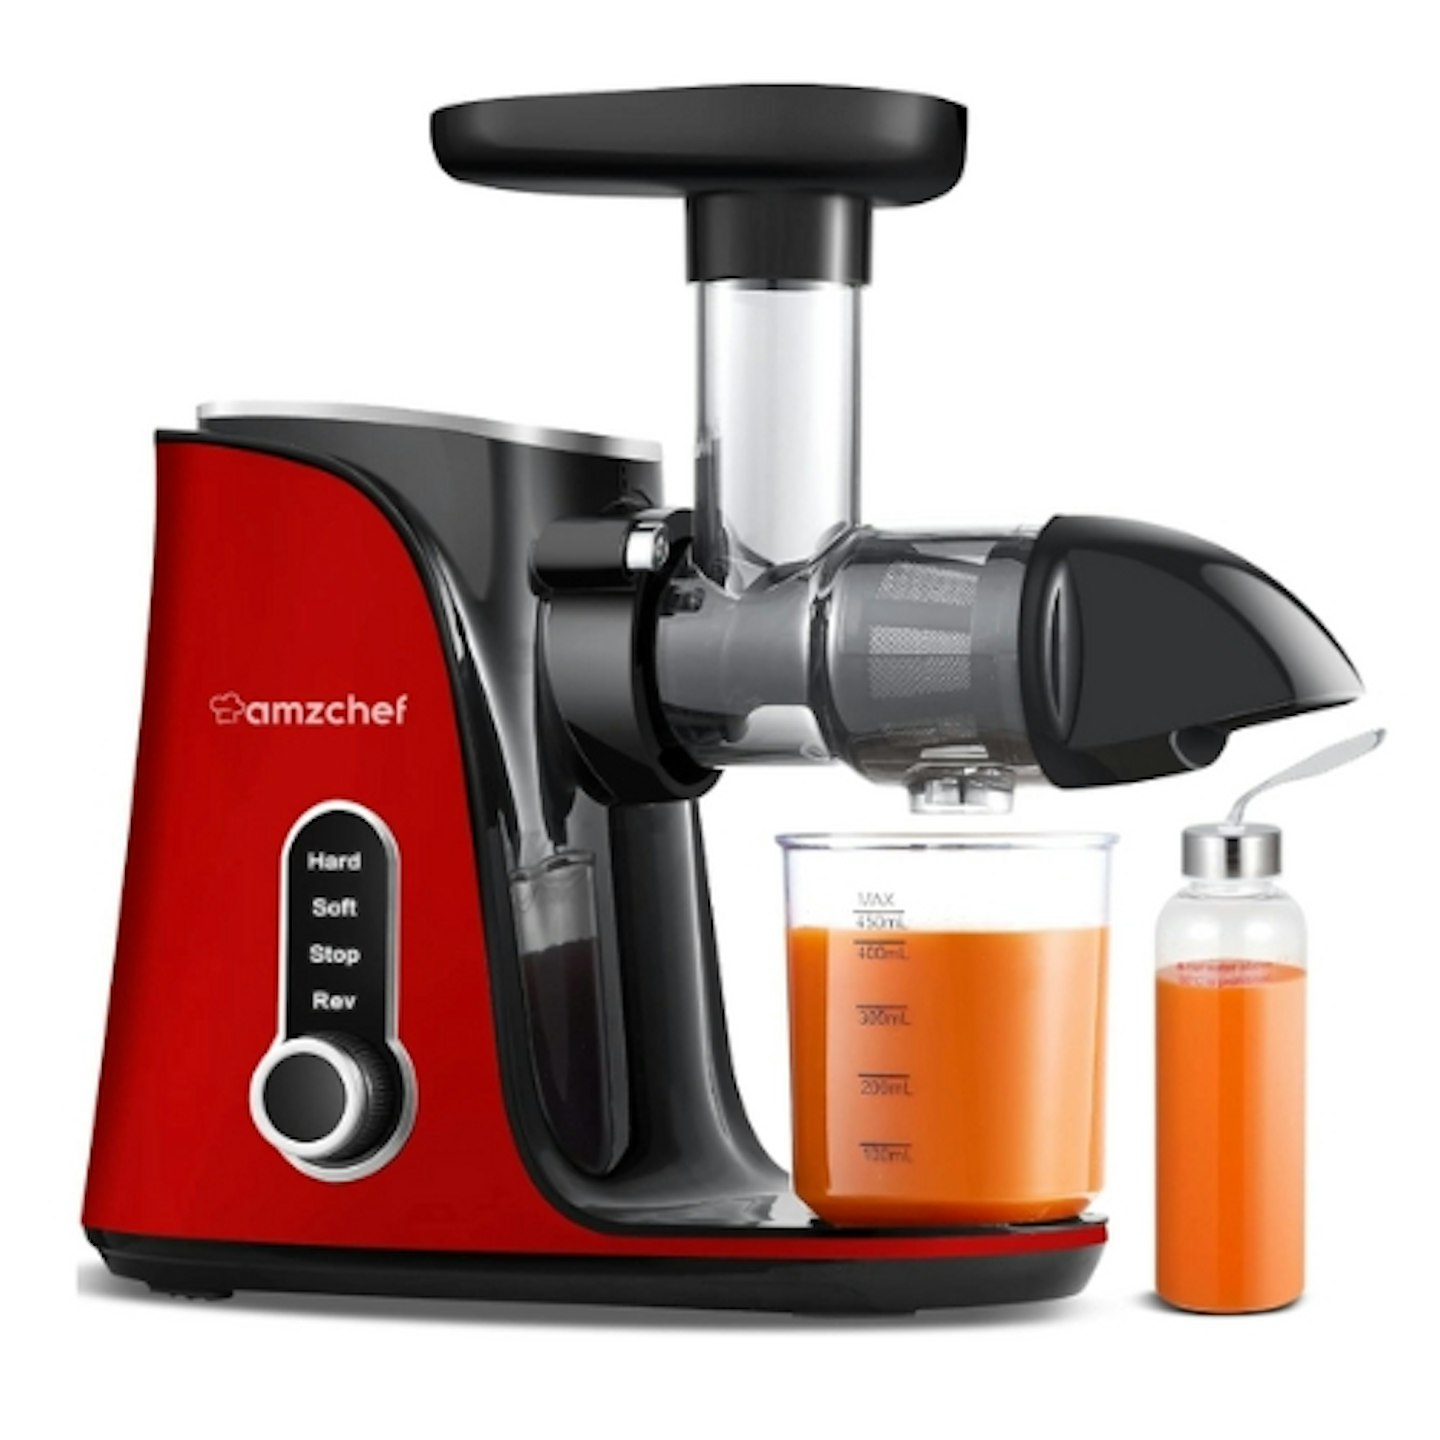 AMZCHEF Cold Press Juicer with 2 Speed Control